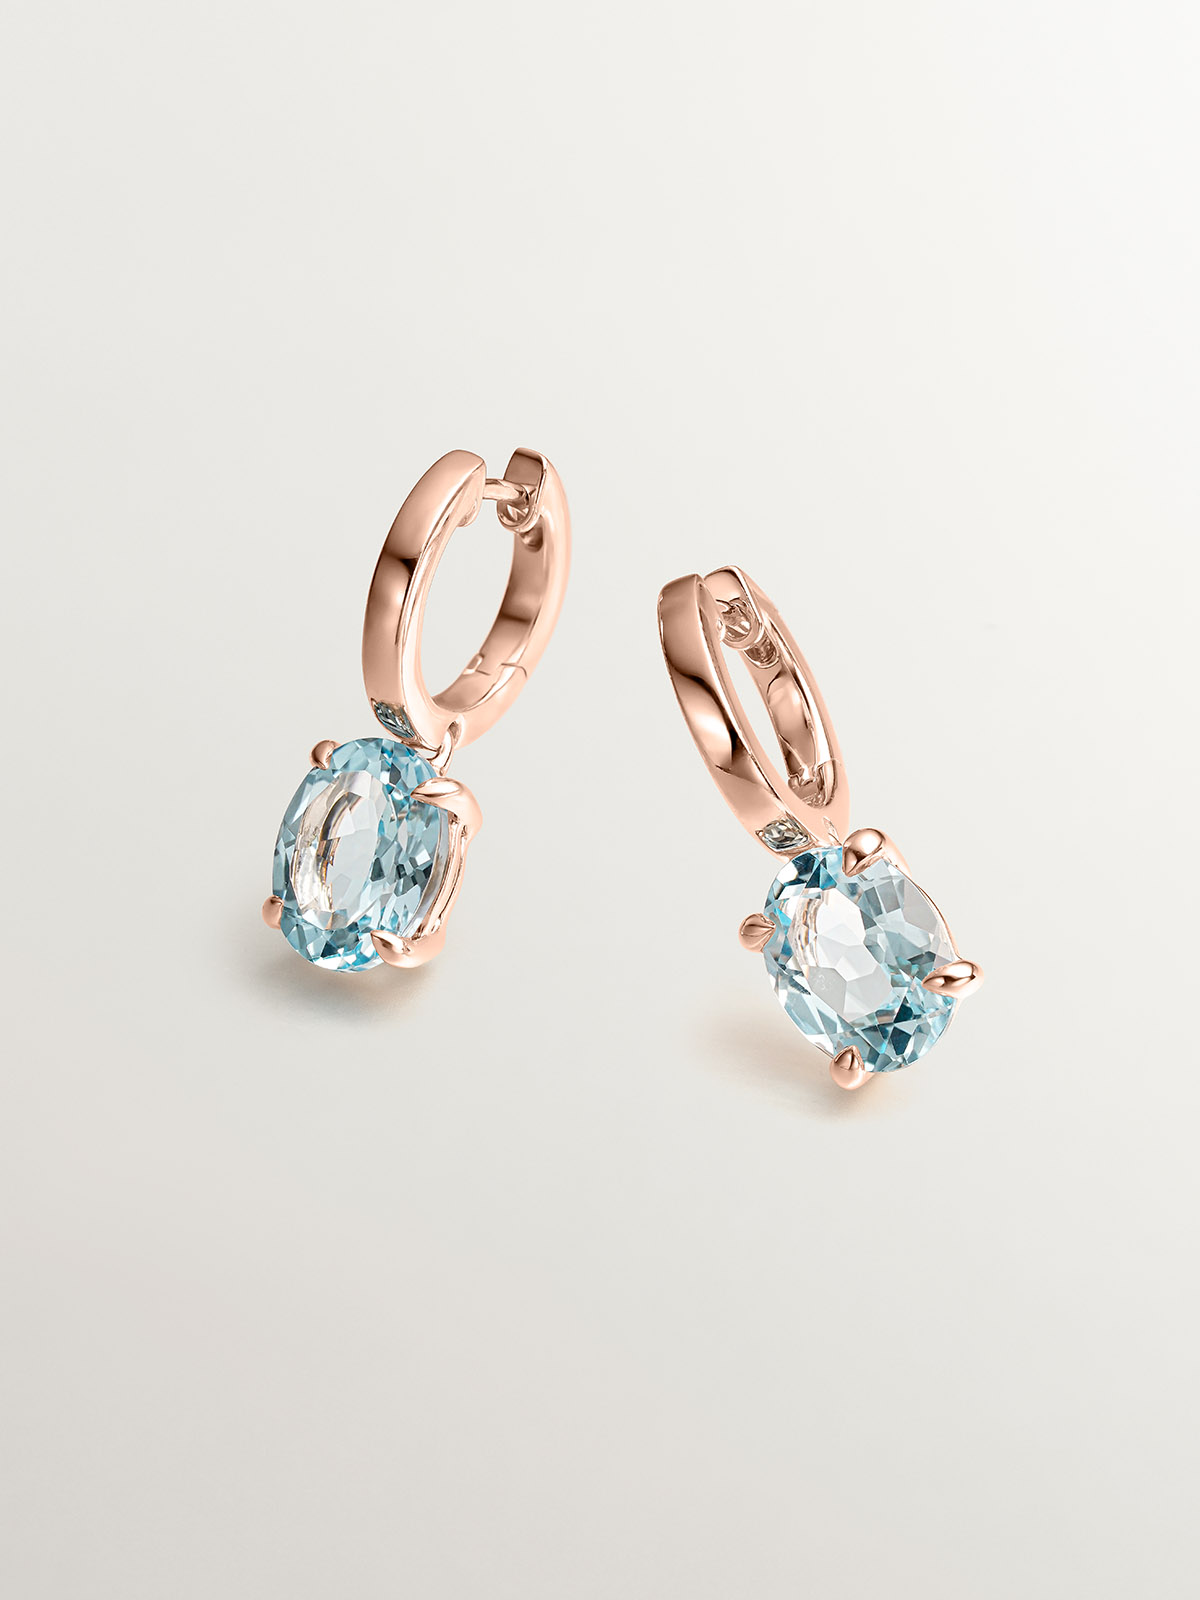 925 Silver earrings plated in 18K rose gold with sky blue topaz.